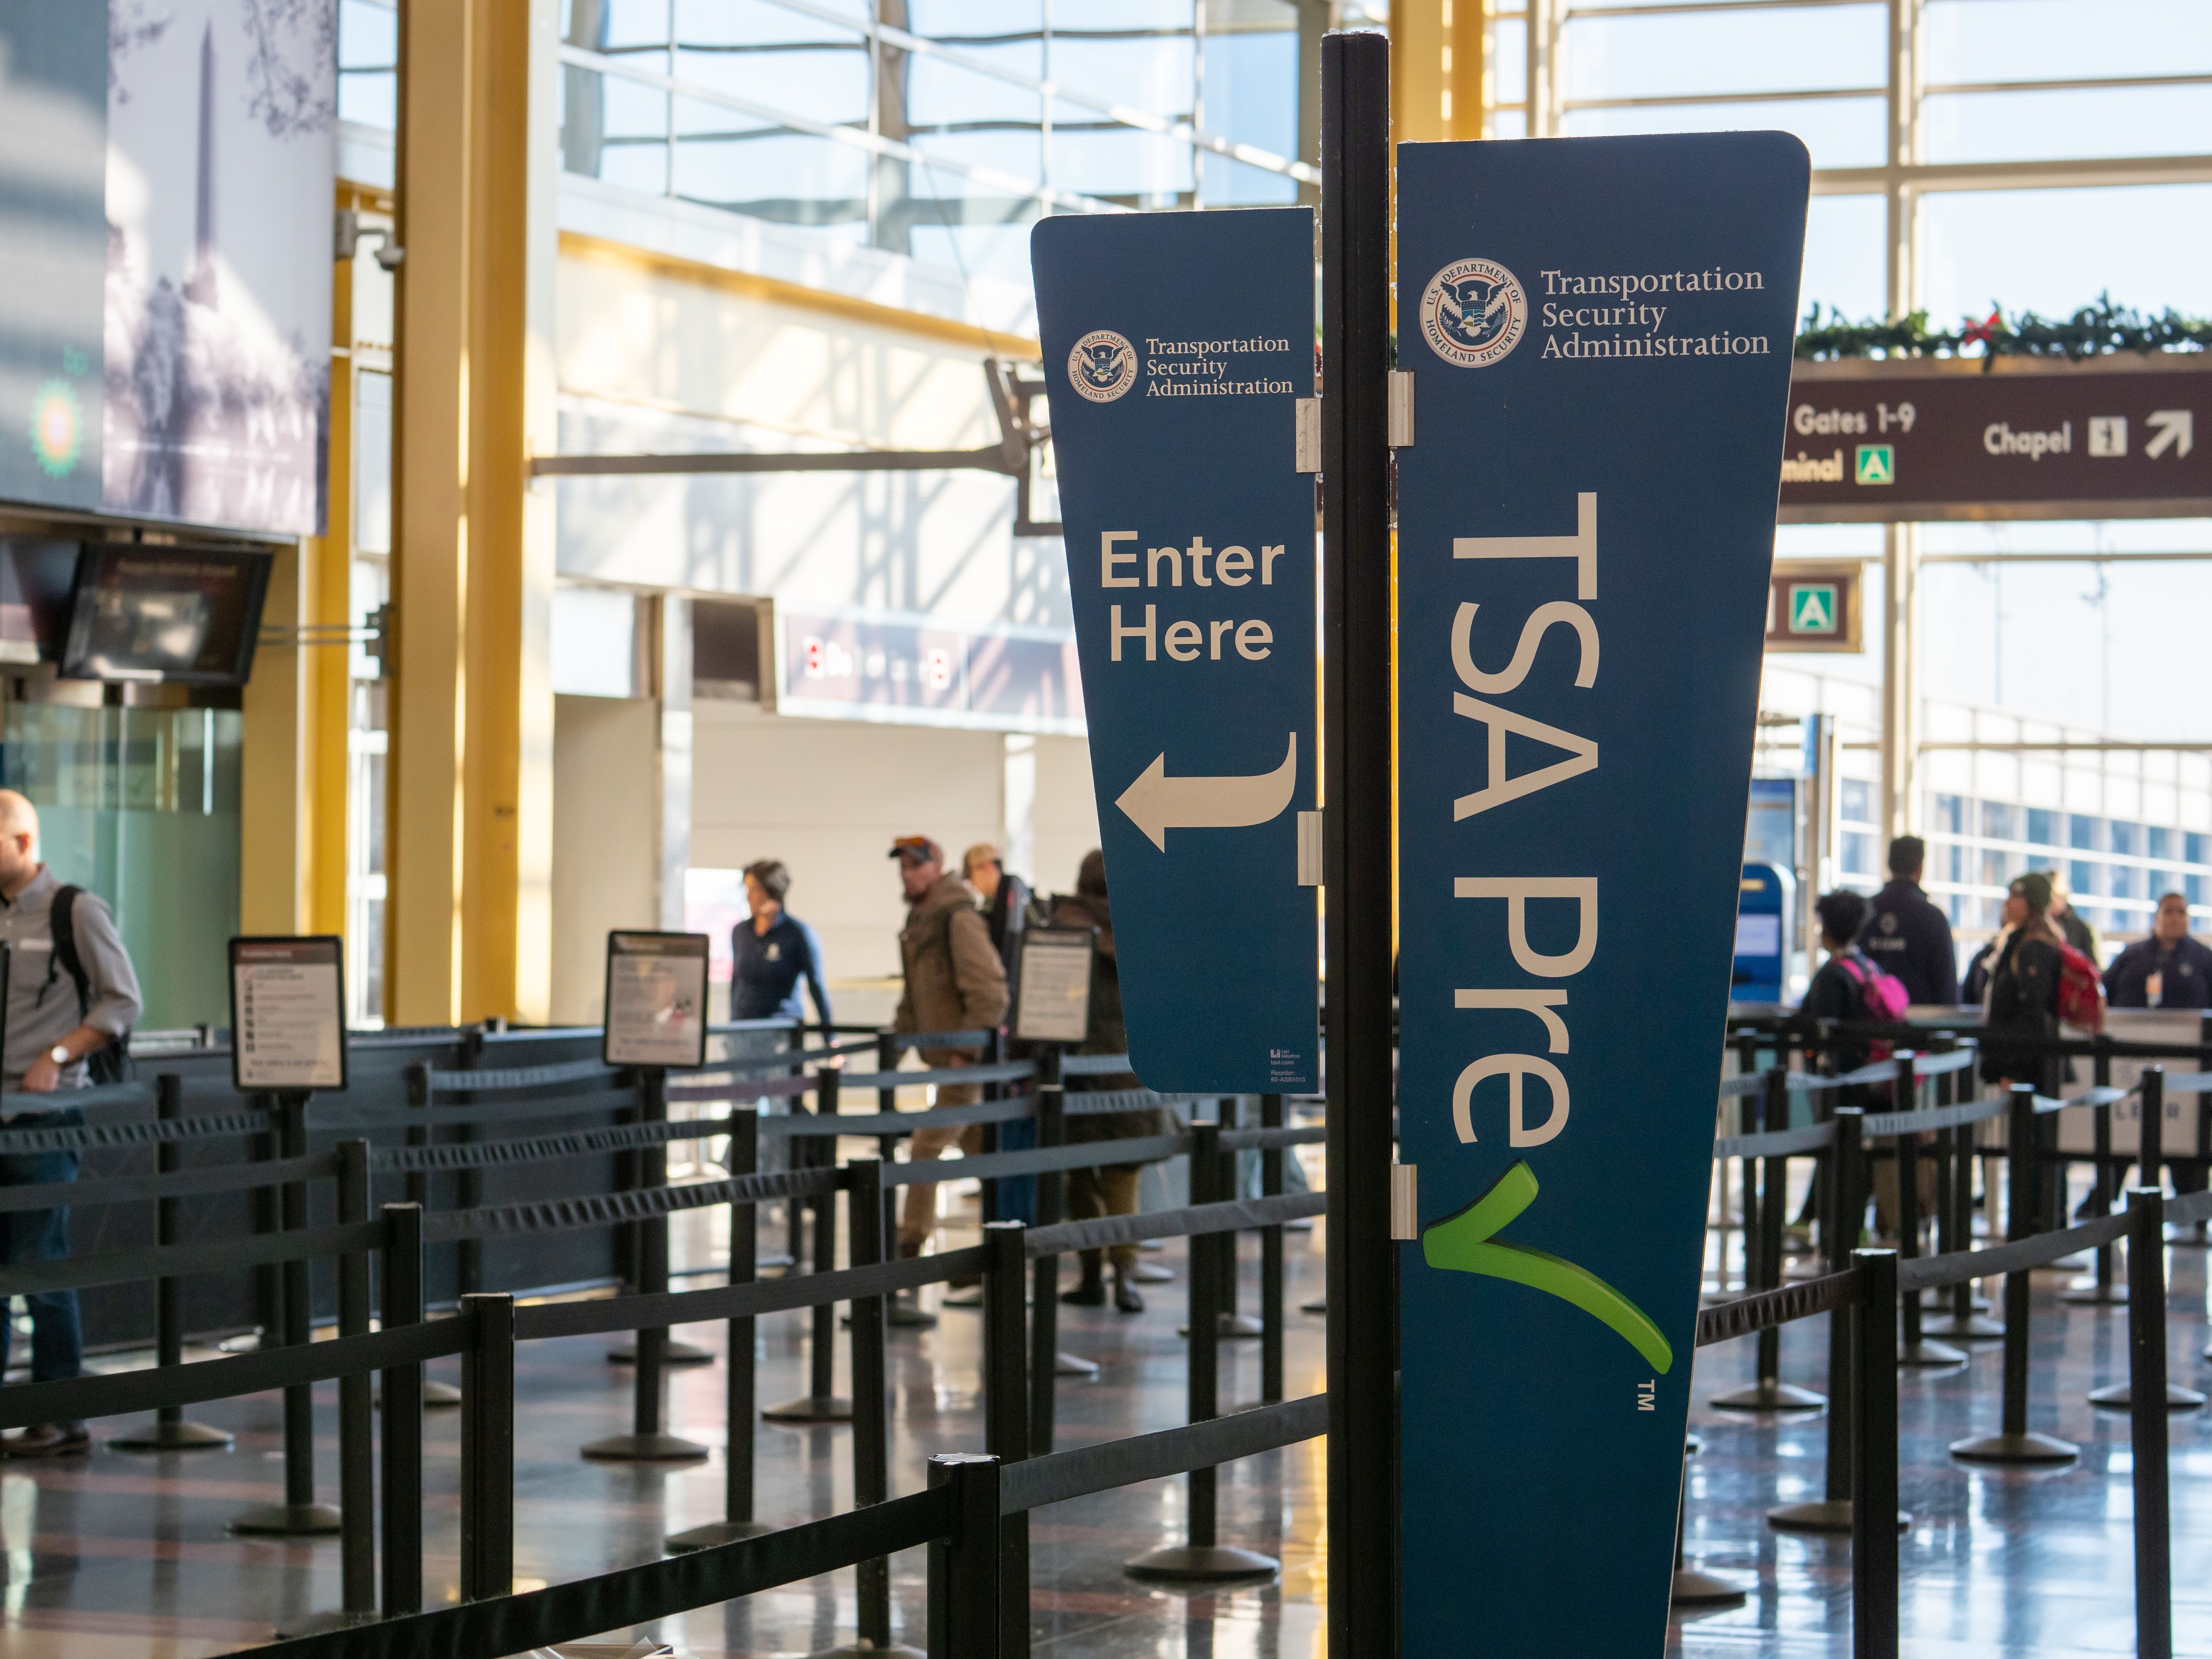 TSA Approved ways to Cut down Airport wait times - GTI Travel